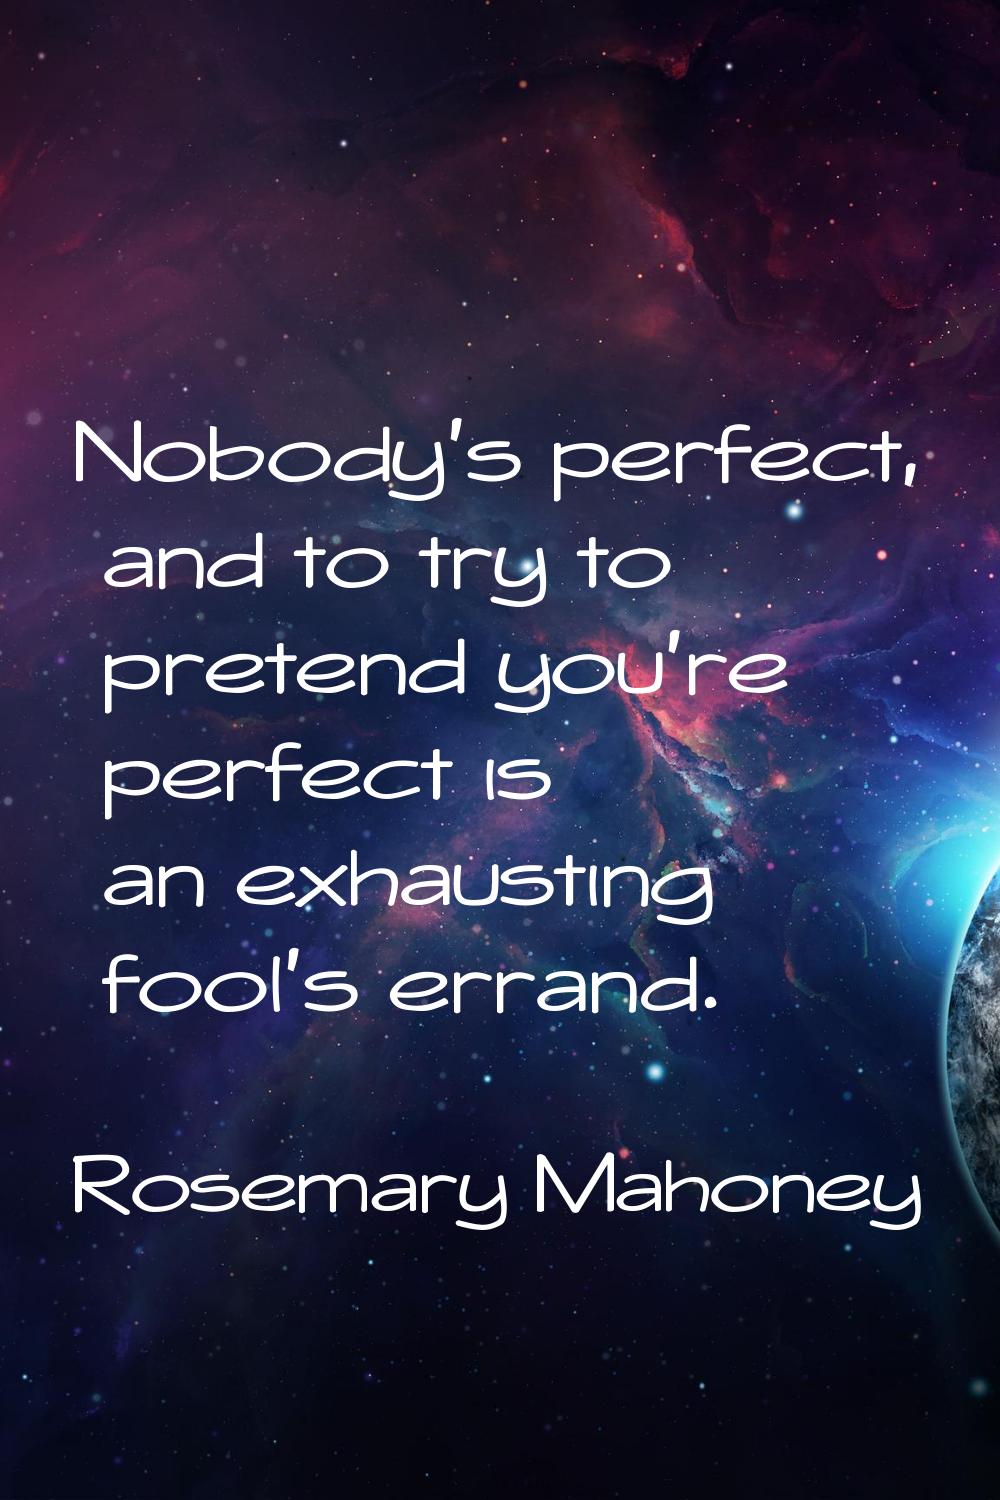 Nobody's perfect, and to try to pretend you're perfect is an exhausting fool's errand.